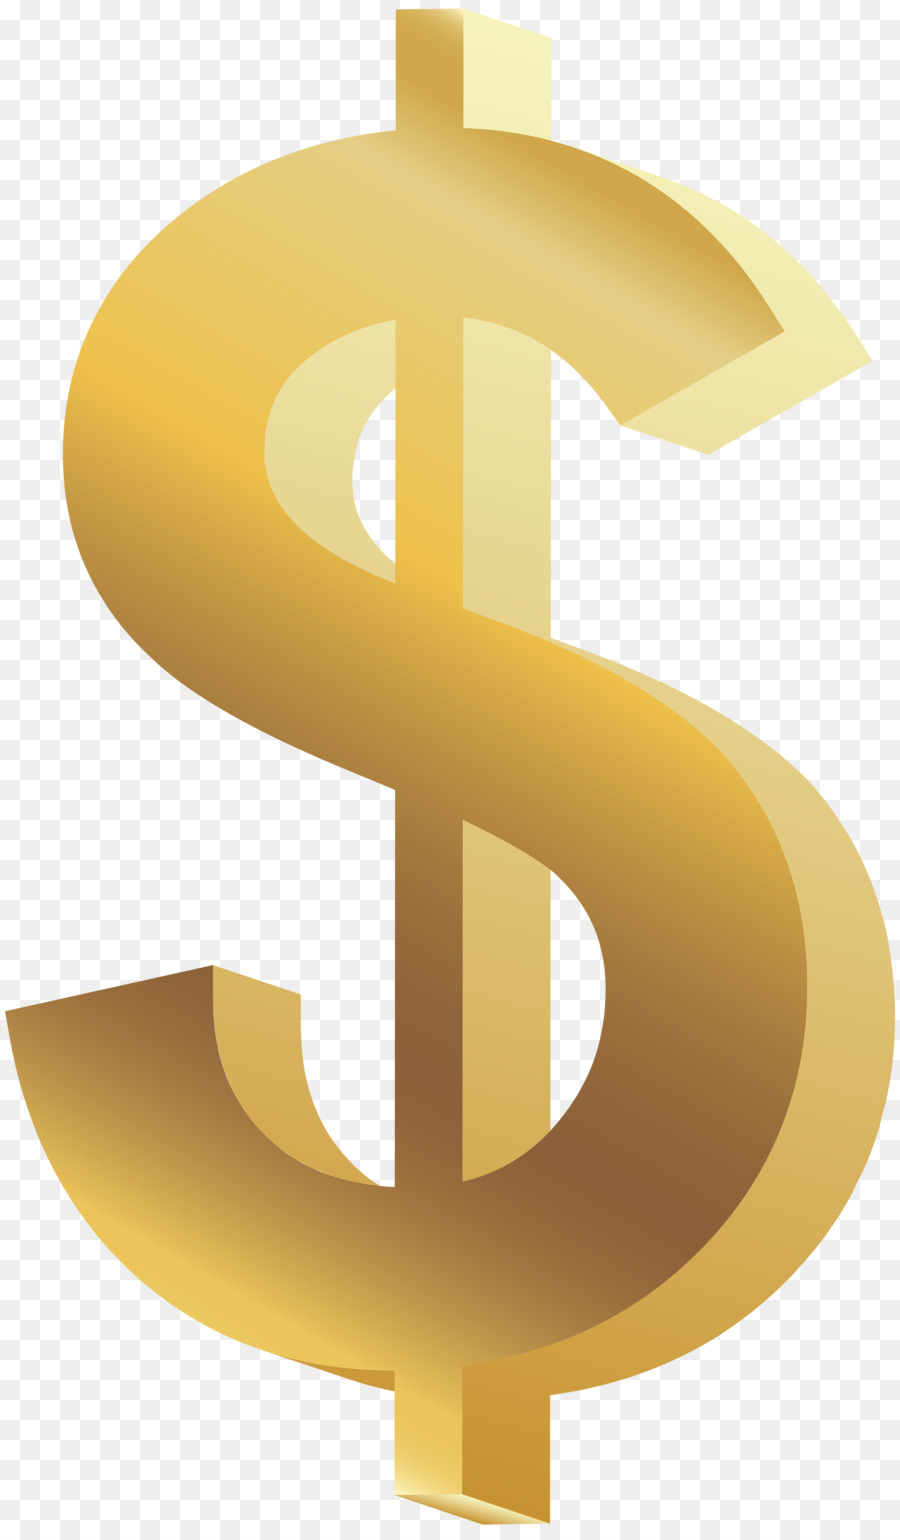 Australian dollar Dollar sign Currency symbol - quality png download - 2936*5000 - Free Transparent Australian Dollar png Download.